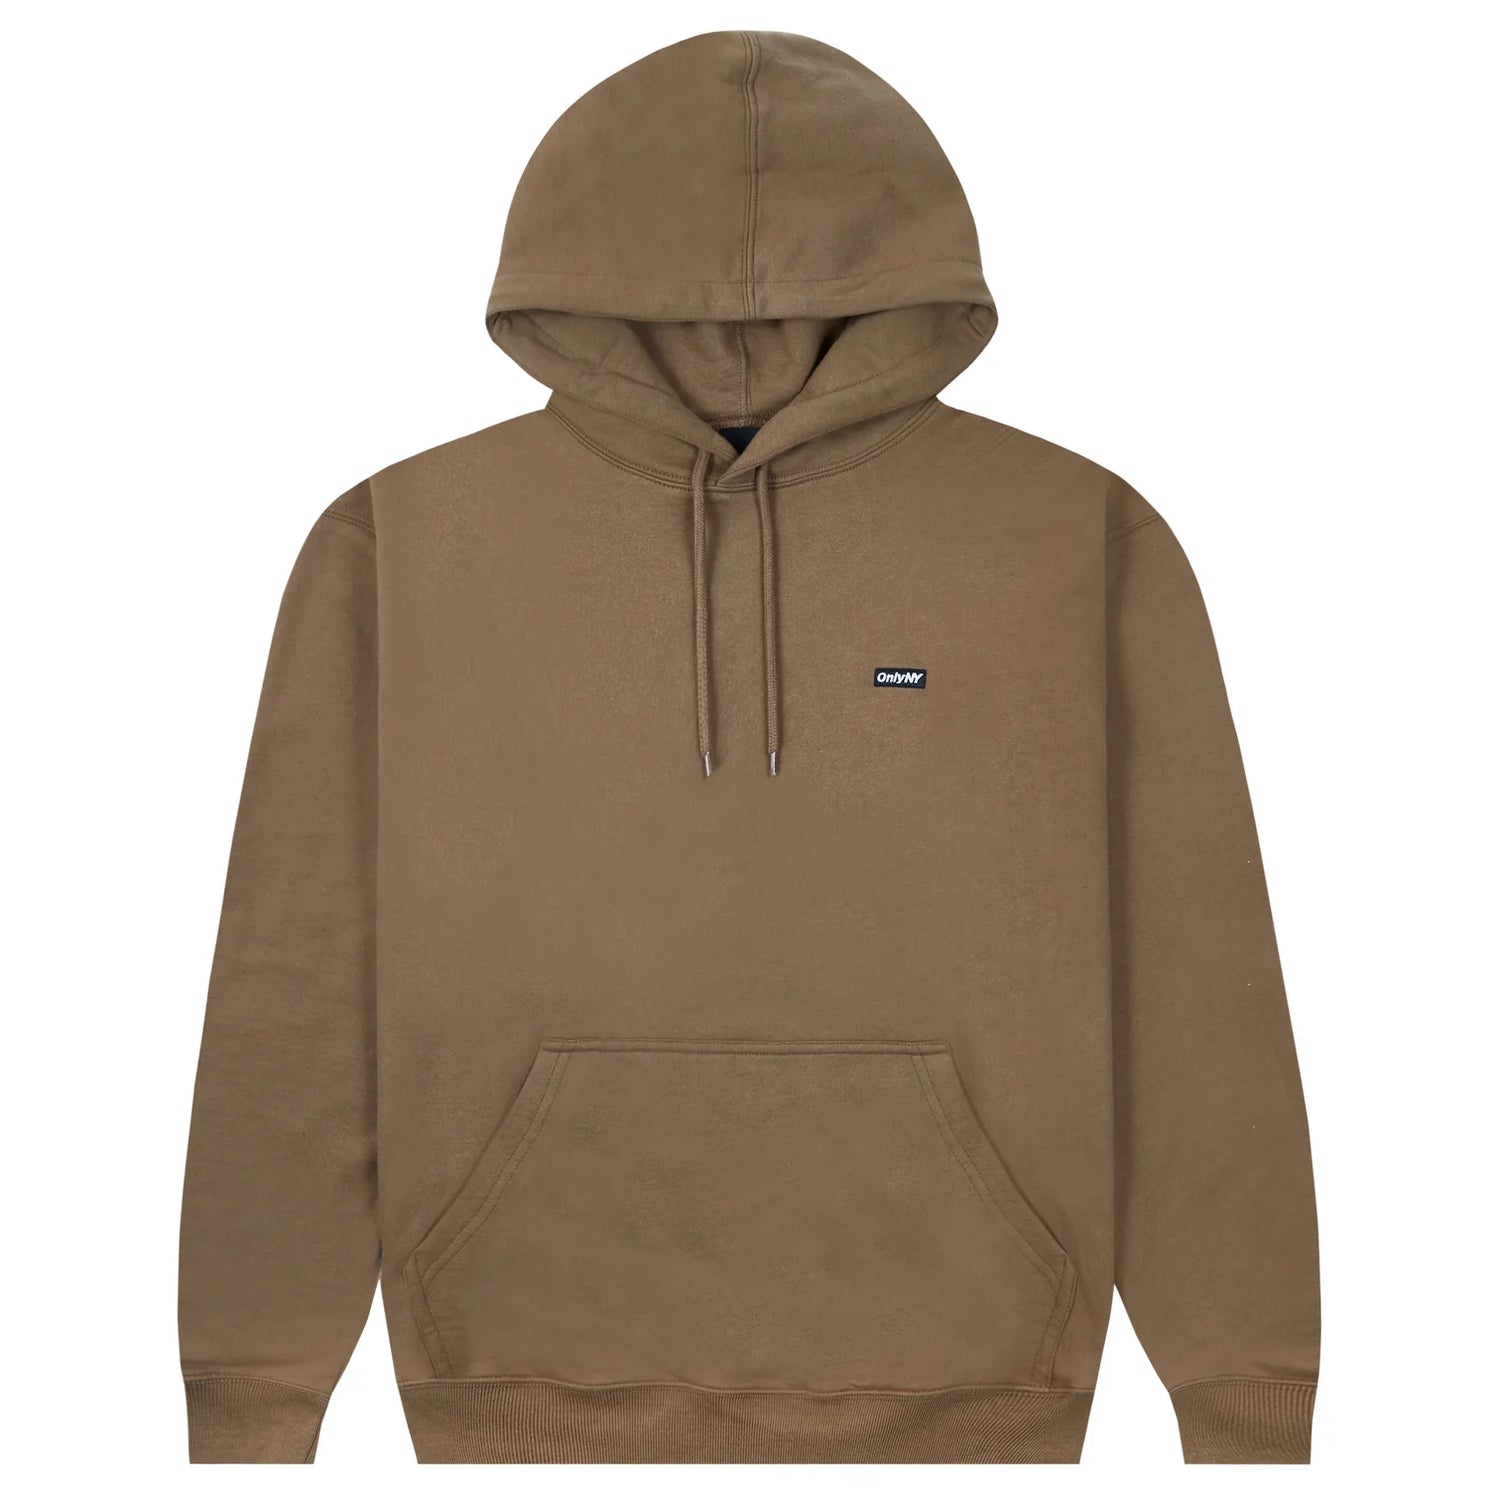 Only NY Block Logo Hoodie - Brown